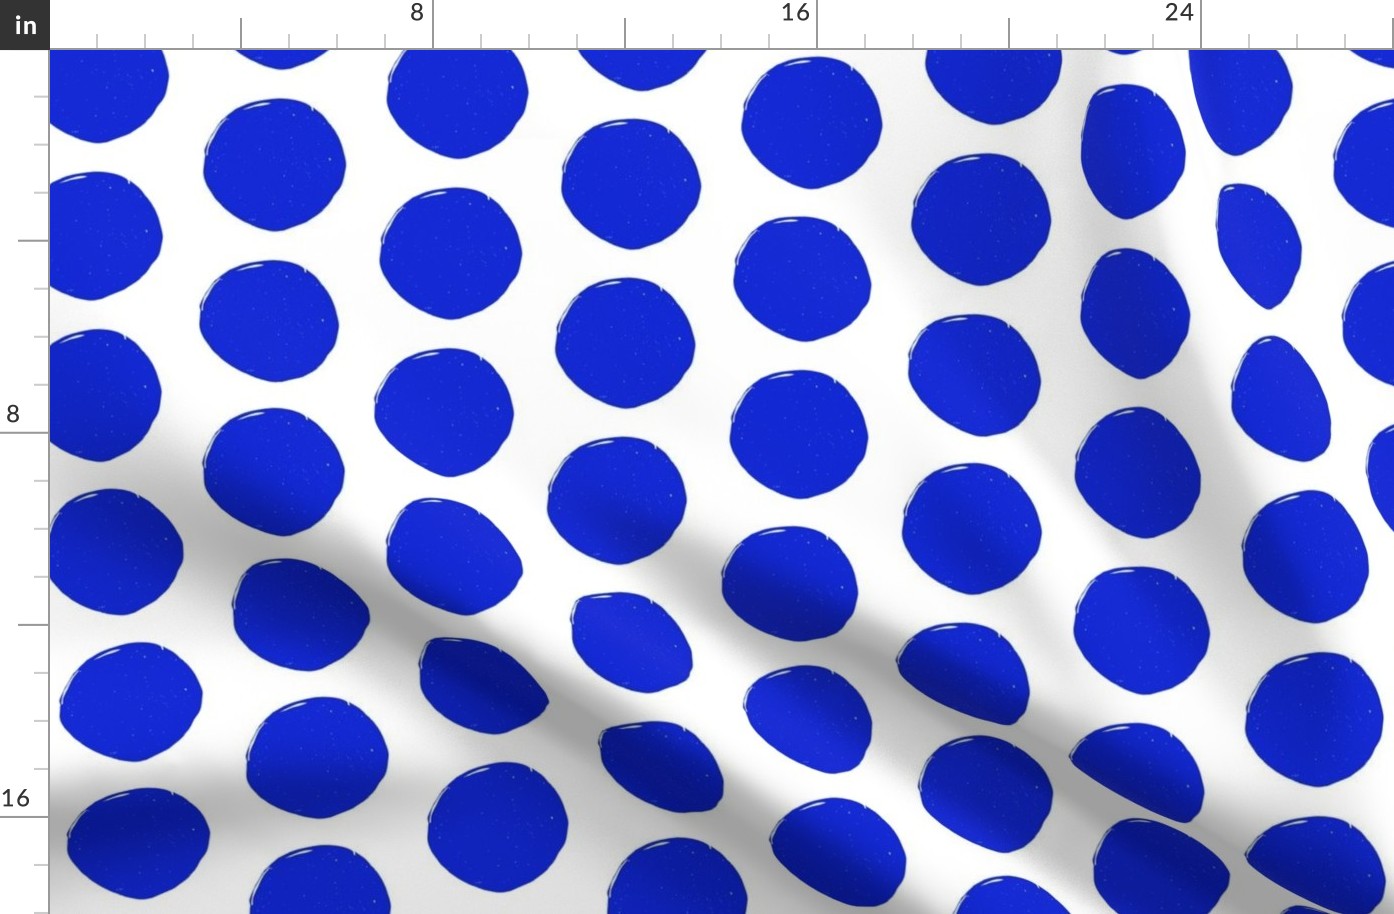 Blue and White Polka Dots